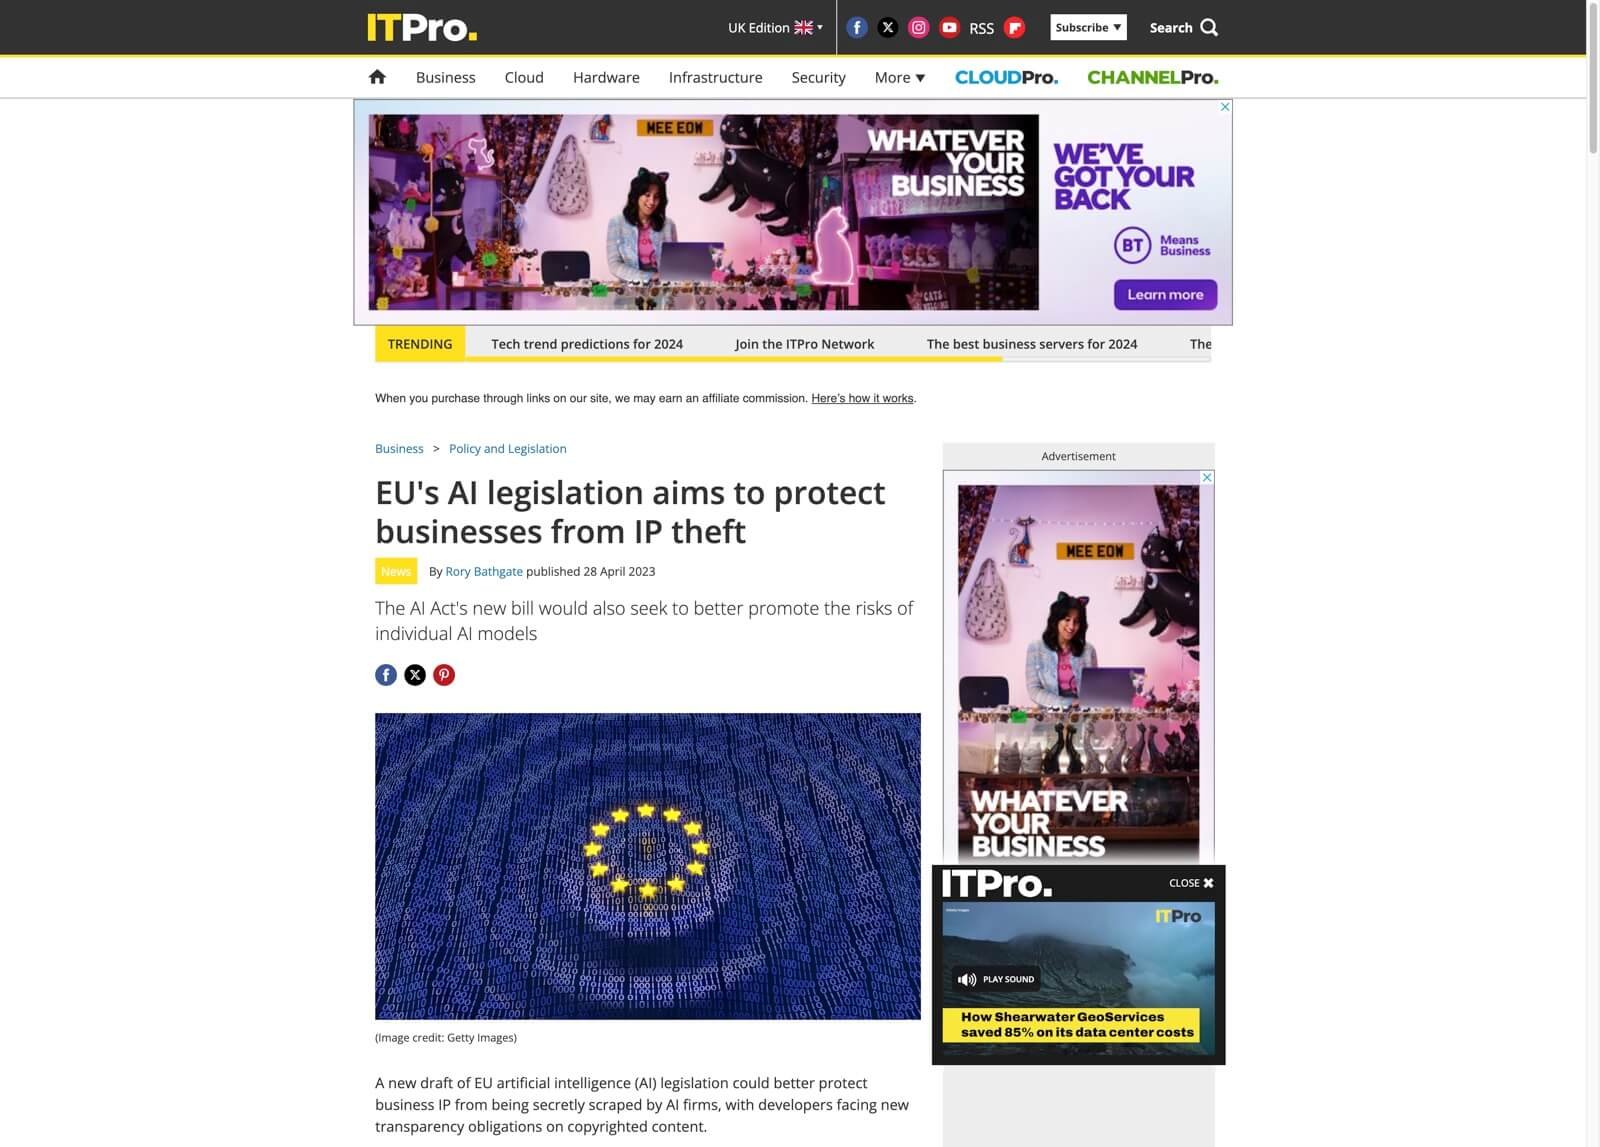 IT-Pro-EU-s-AI-legislation-aims-to-protect-businesses-from-IP-theft-ITPro.jpg